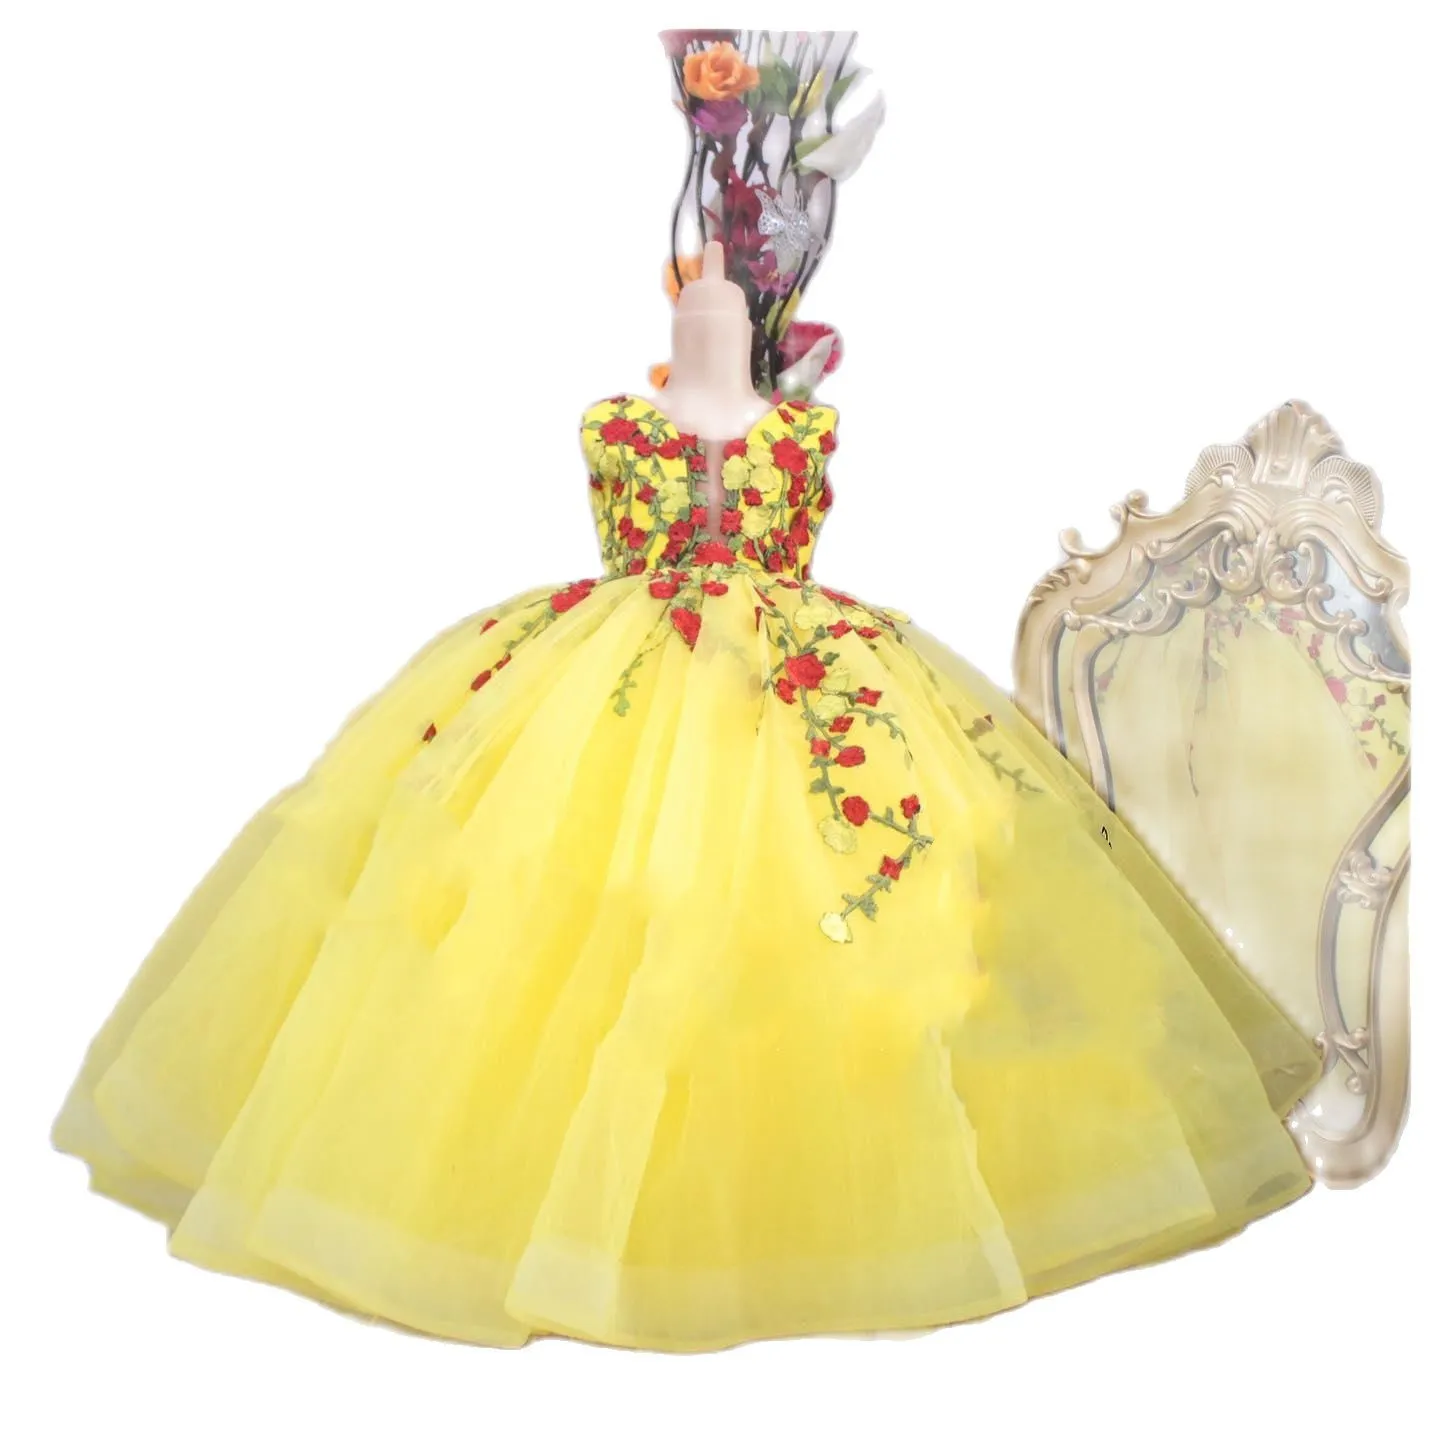 

Yellow Lace Flower Girl Dresses Tulle Ball Gown Little Girl Wedding Dresses Cheap Communion Pageant Dresses Gowns